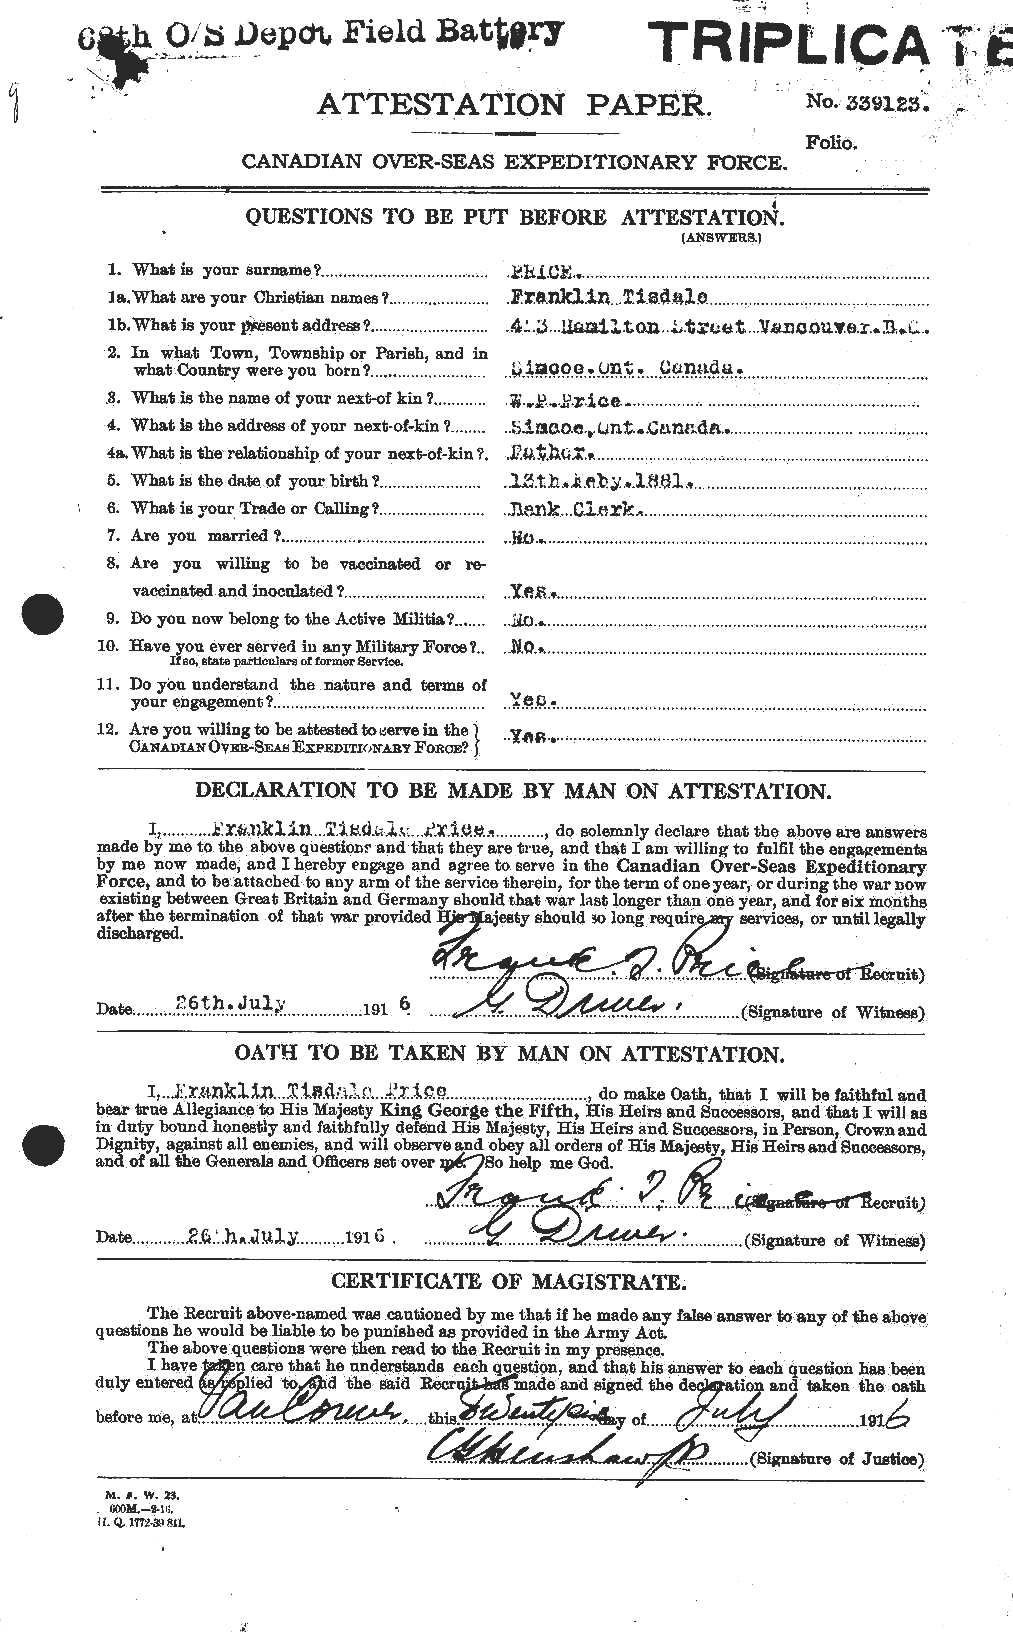 Personnel Records of the First World War - CEF 587061a